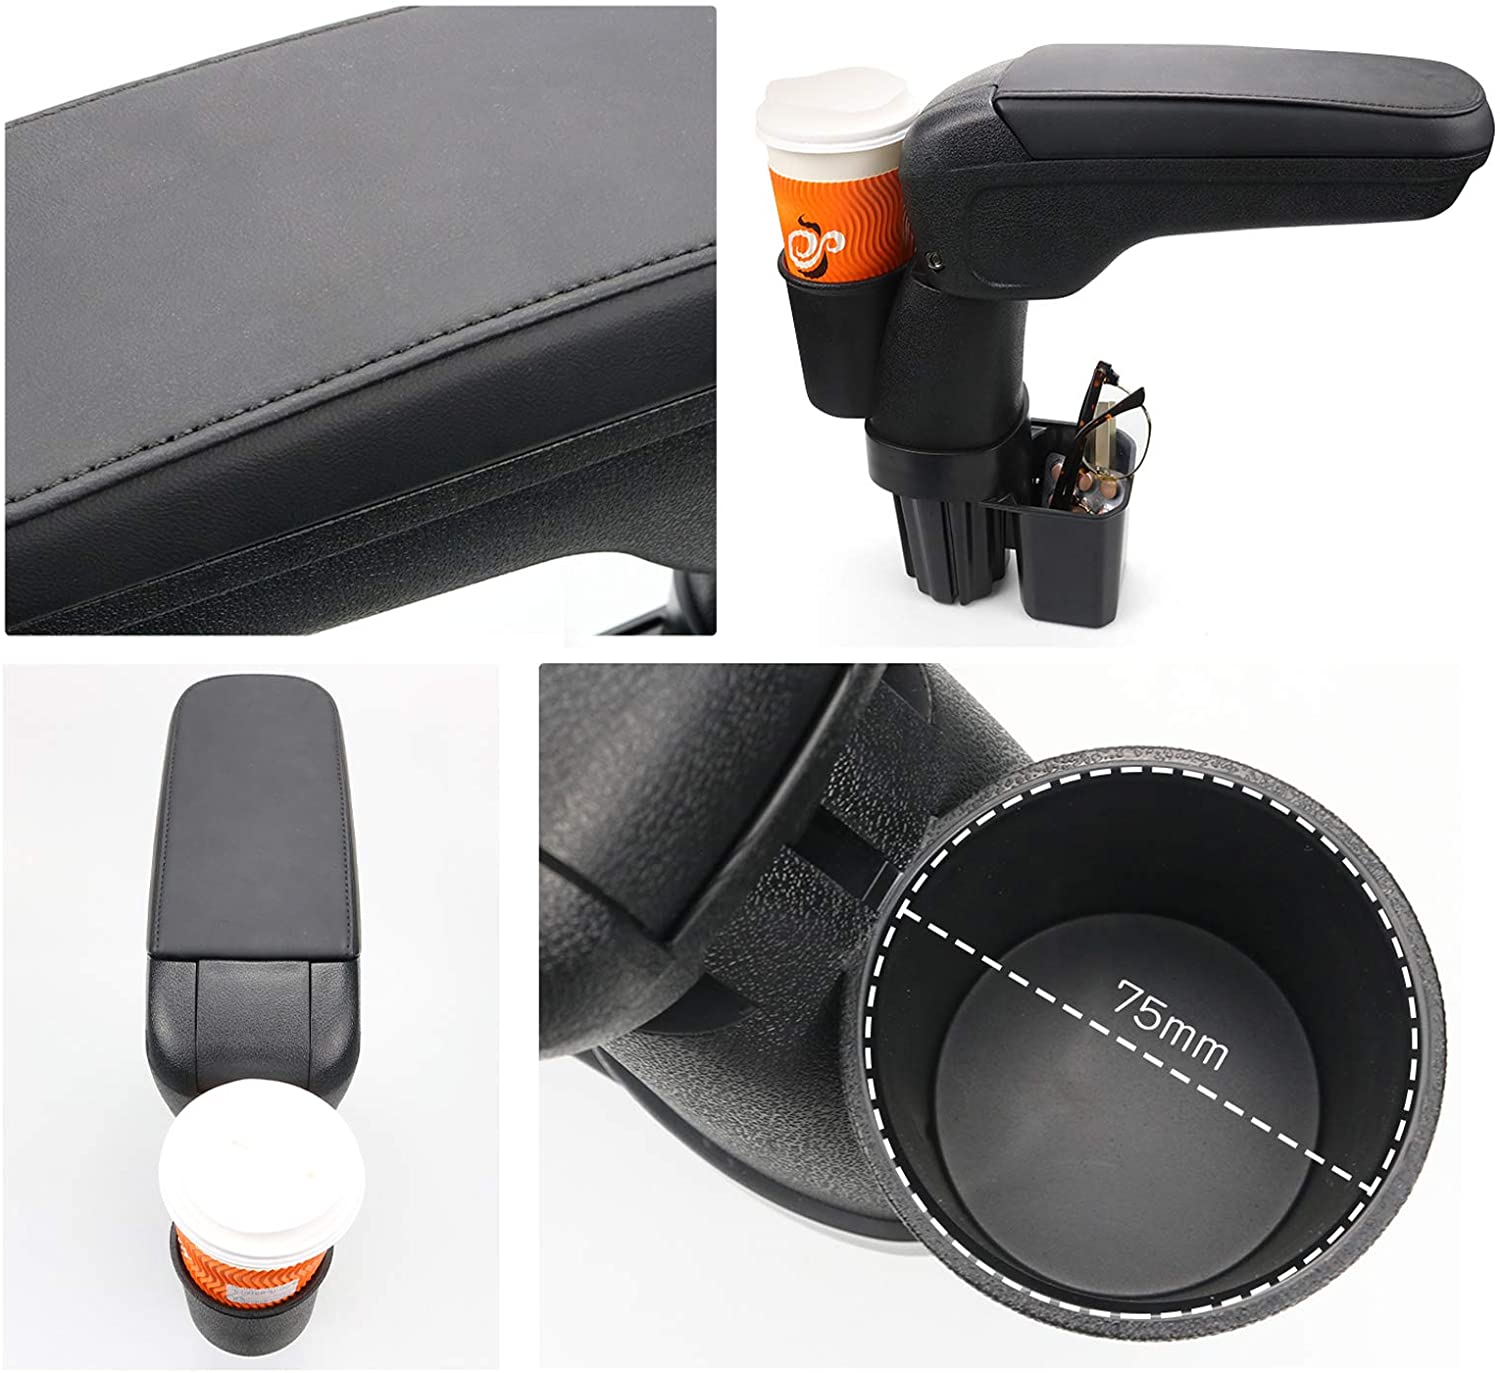 Buy [LFOTPP] New Suzuki Jimny exclusive front armrest JIMNY JB64 JB74  Sliding storage tray with drink holder Synthetic leather Leather  model-specific parts from Japan - Buy authentic Plus exclusive items from  Japan